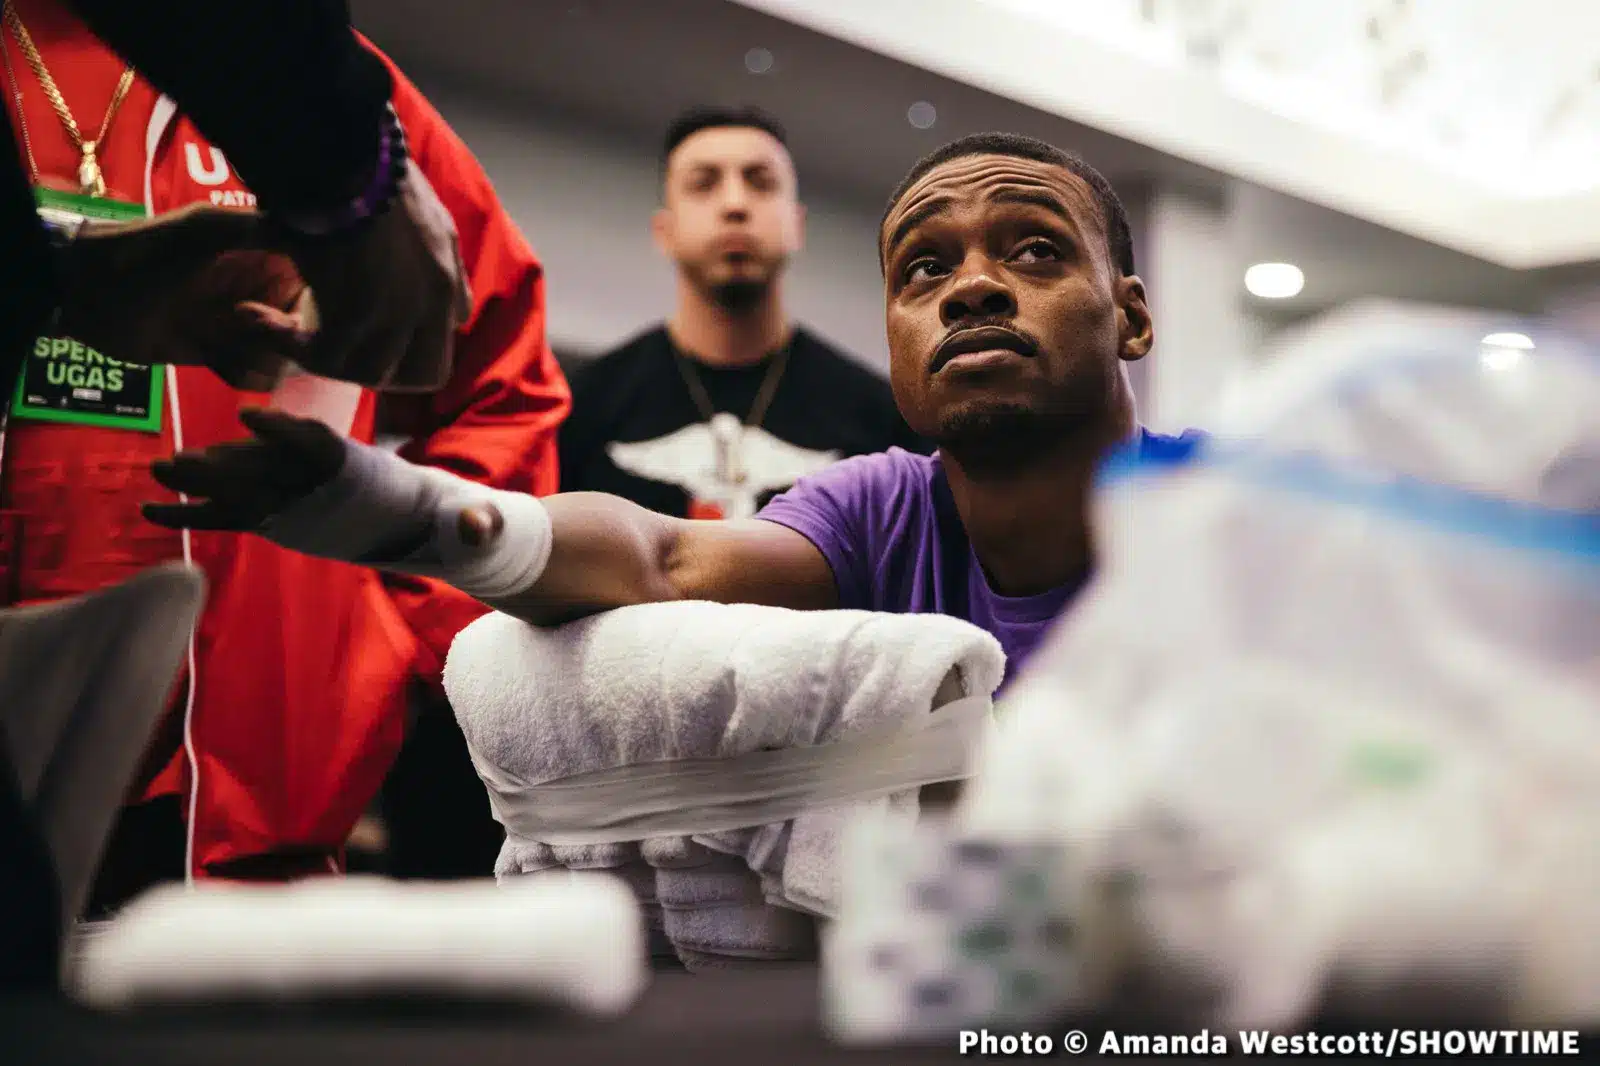 Image: Errol Spence vs. Terence Crawford even closer to being made says Stephen Espinoza